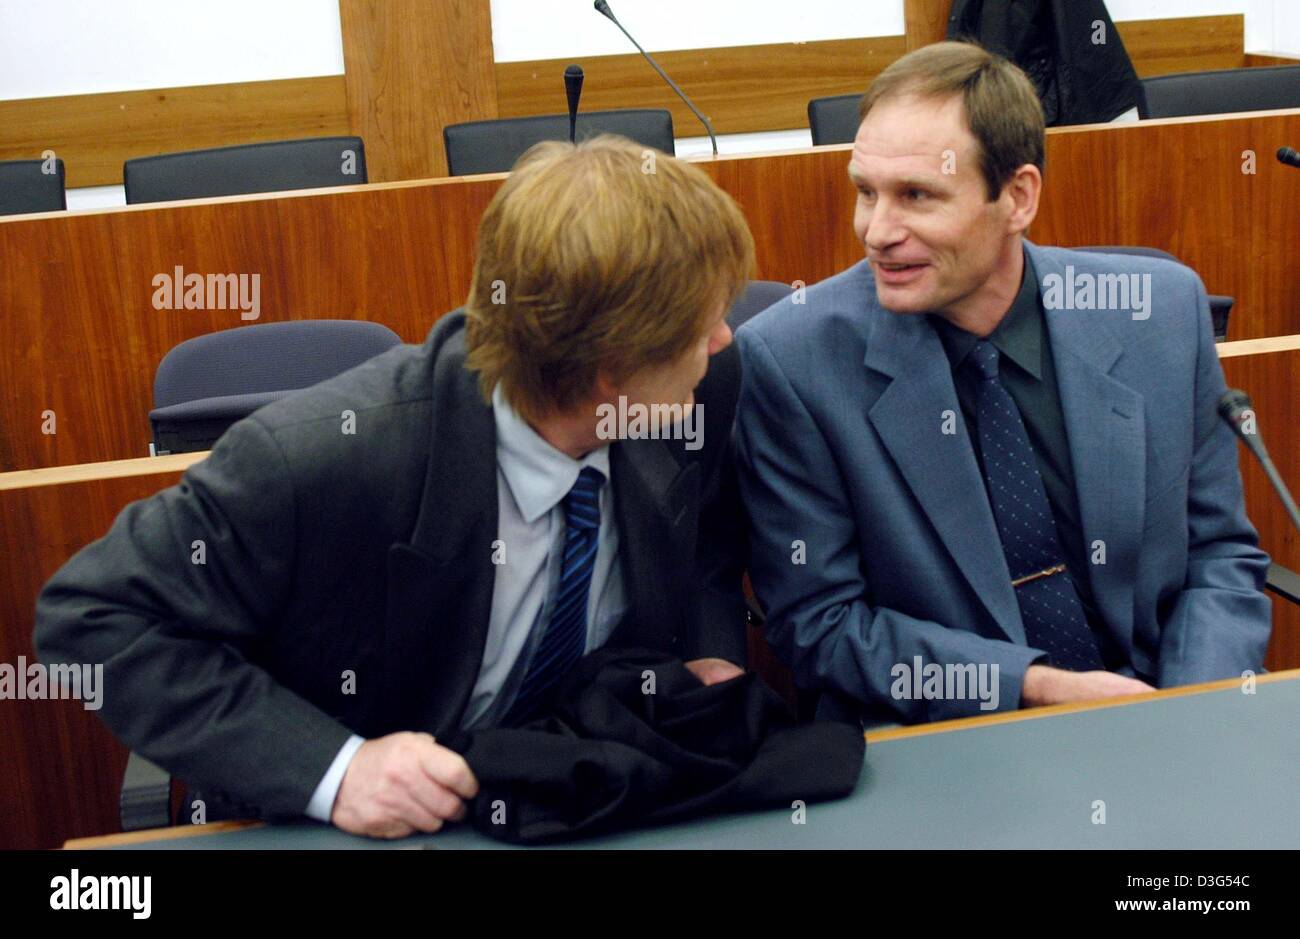 (dpa) - 42-year-old German computer specialist Armin Meiwes (R) chats with his lawyer Harald Ermel during the second day of his trial at the district court in Kassel, Germany, 8 December 2003. The court was set to view video tapes showing how the self-declared cannibal killed, cut up and ate his victim. The second day of the murder trial of Meiwes began with evidence to be given by Stock Photo